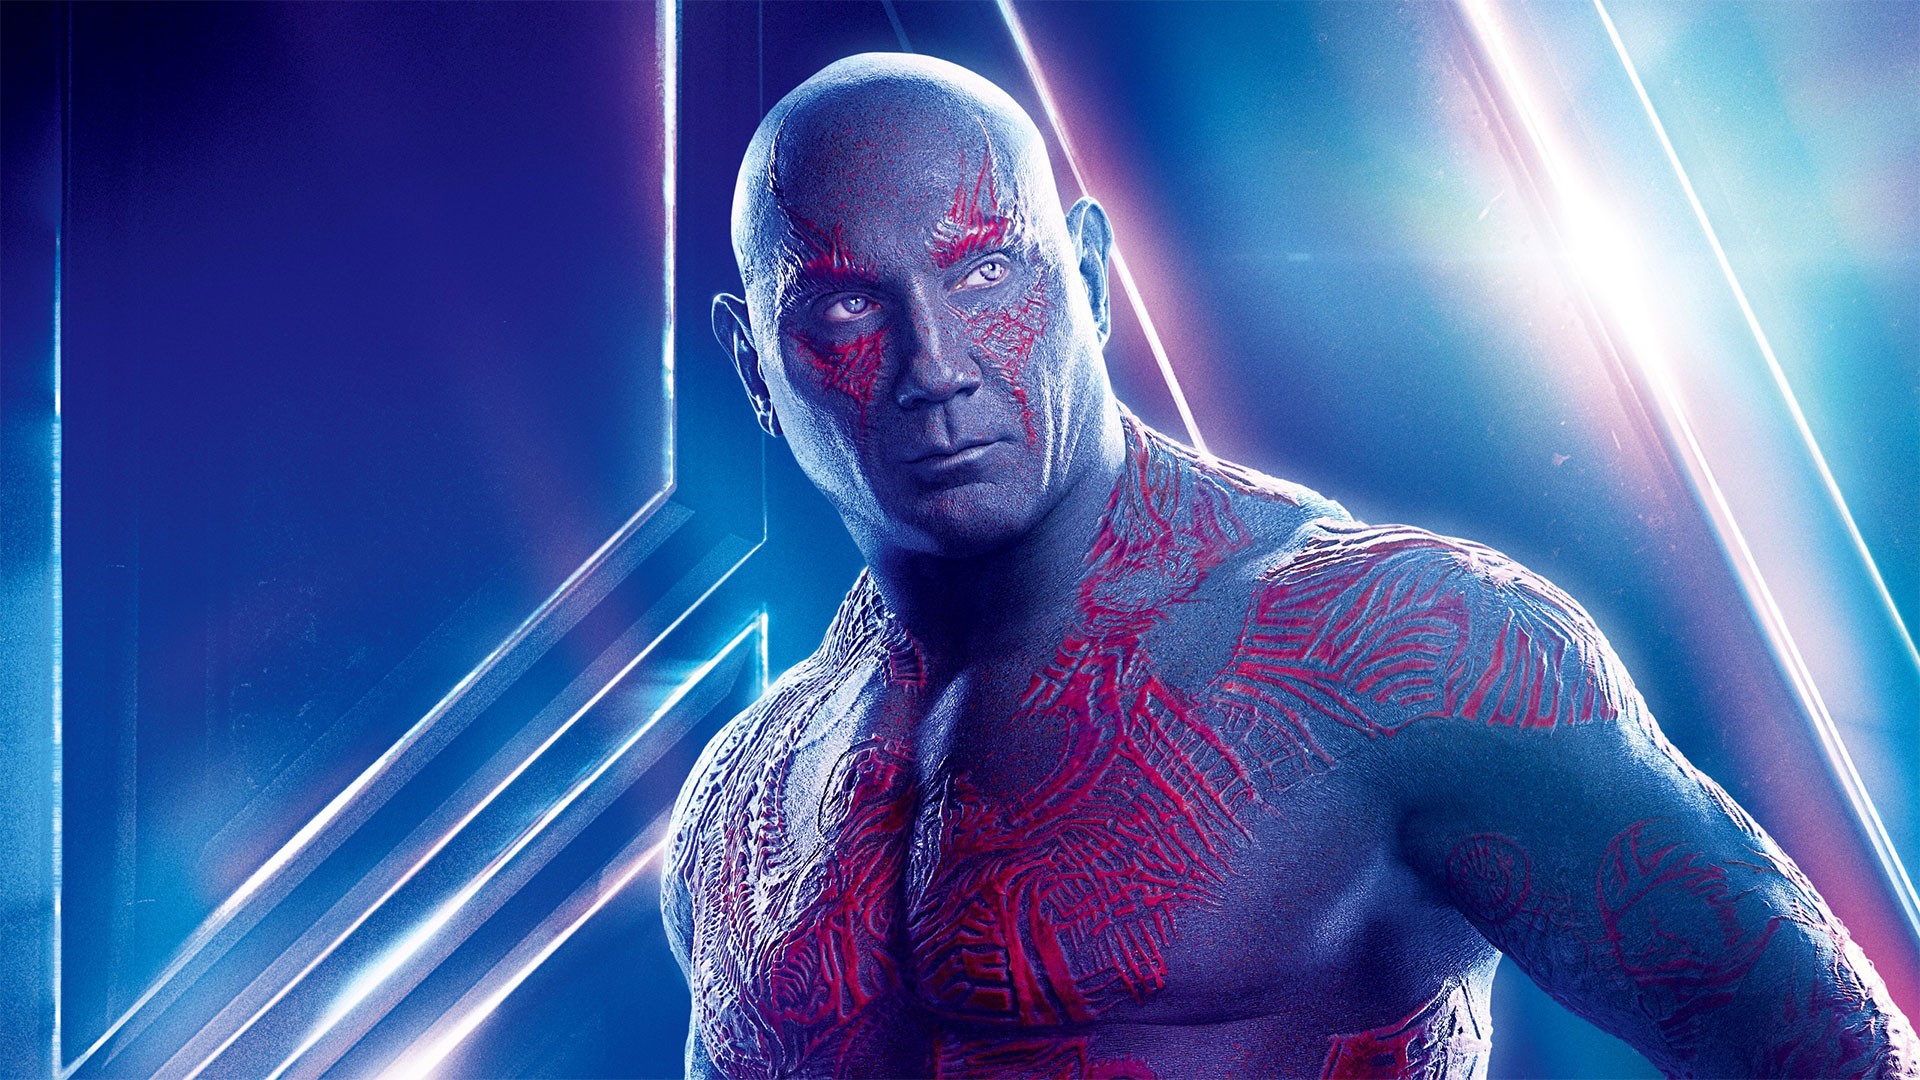 Drax Avengers Endgame Wallpaper HD with high-resolution 1920x1080 pixel. You can use this poster wallpaper for your Desktop Computers, Mac Screensavers, Windows Backgrounds, iPhone Wallpapers, Tablet or Android Lock screen and another Mobile device